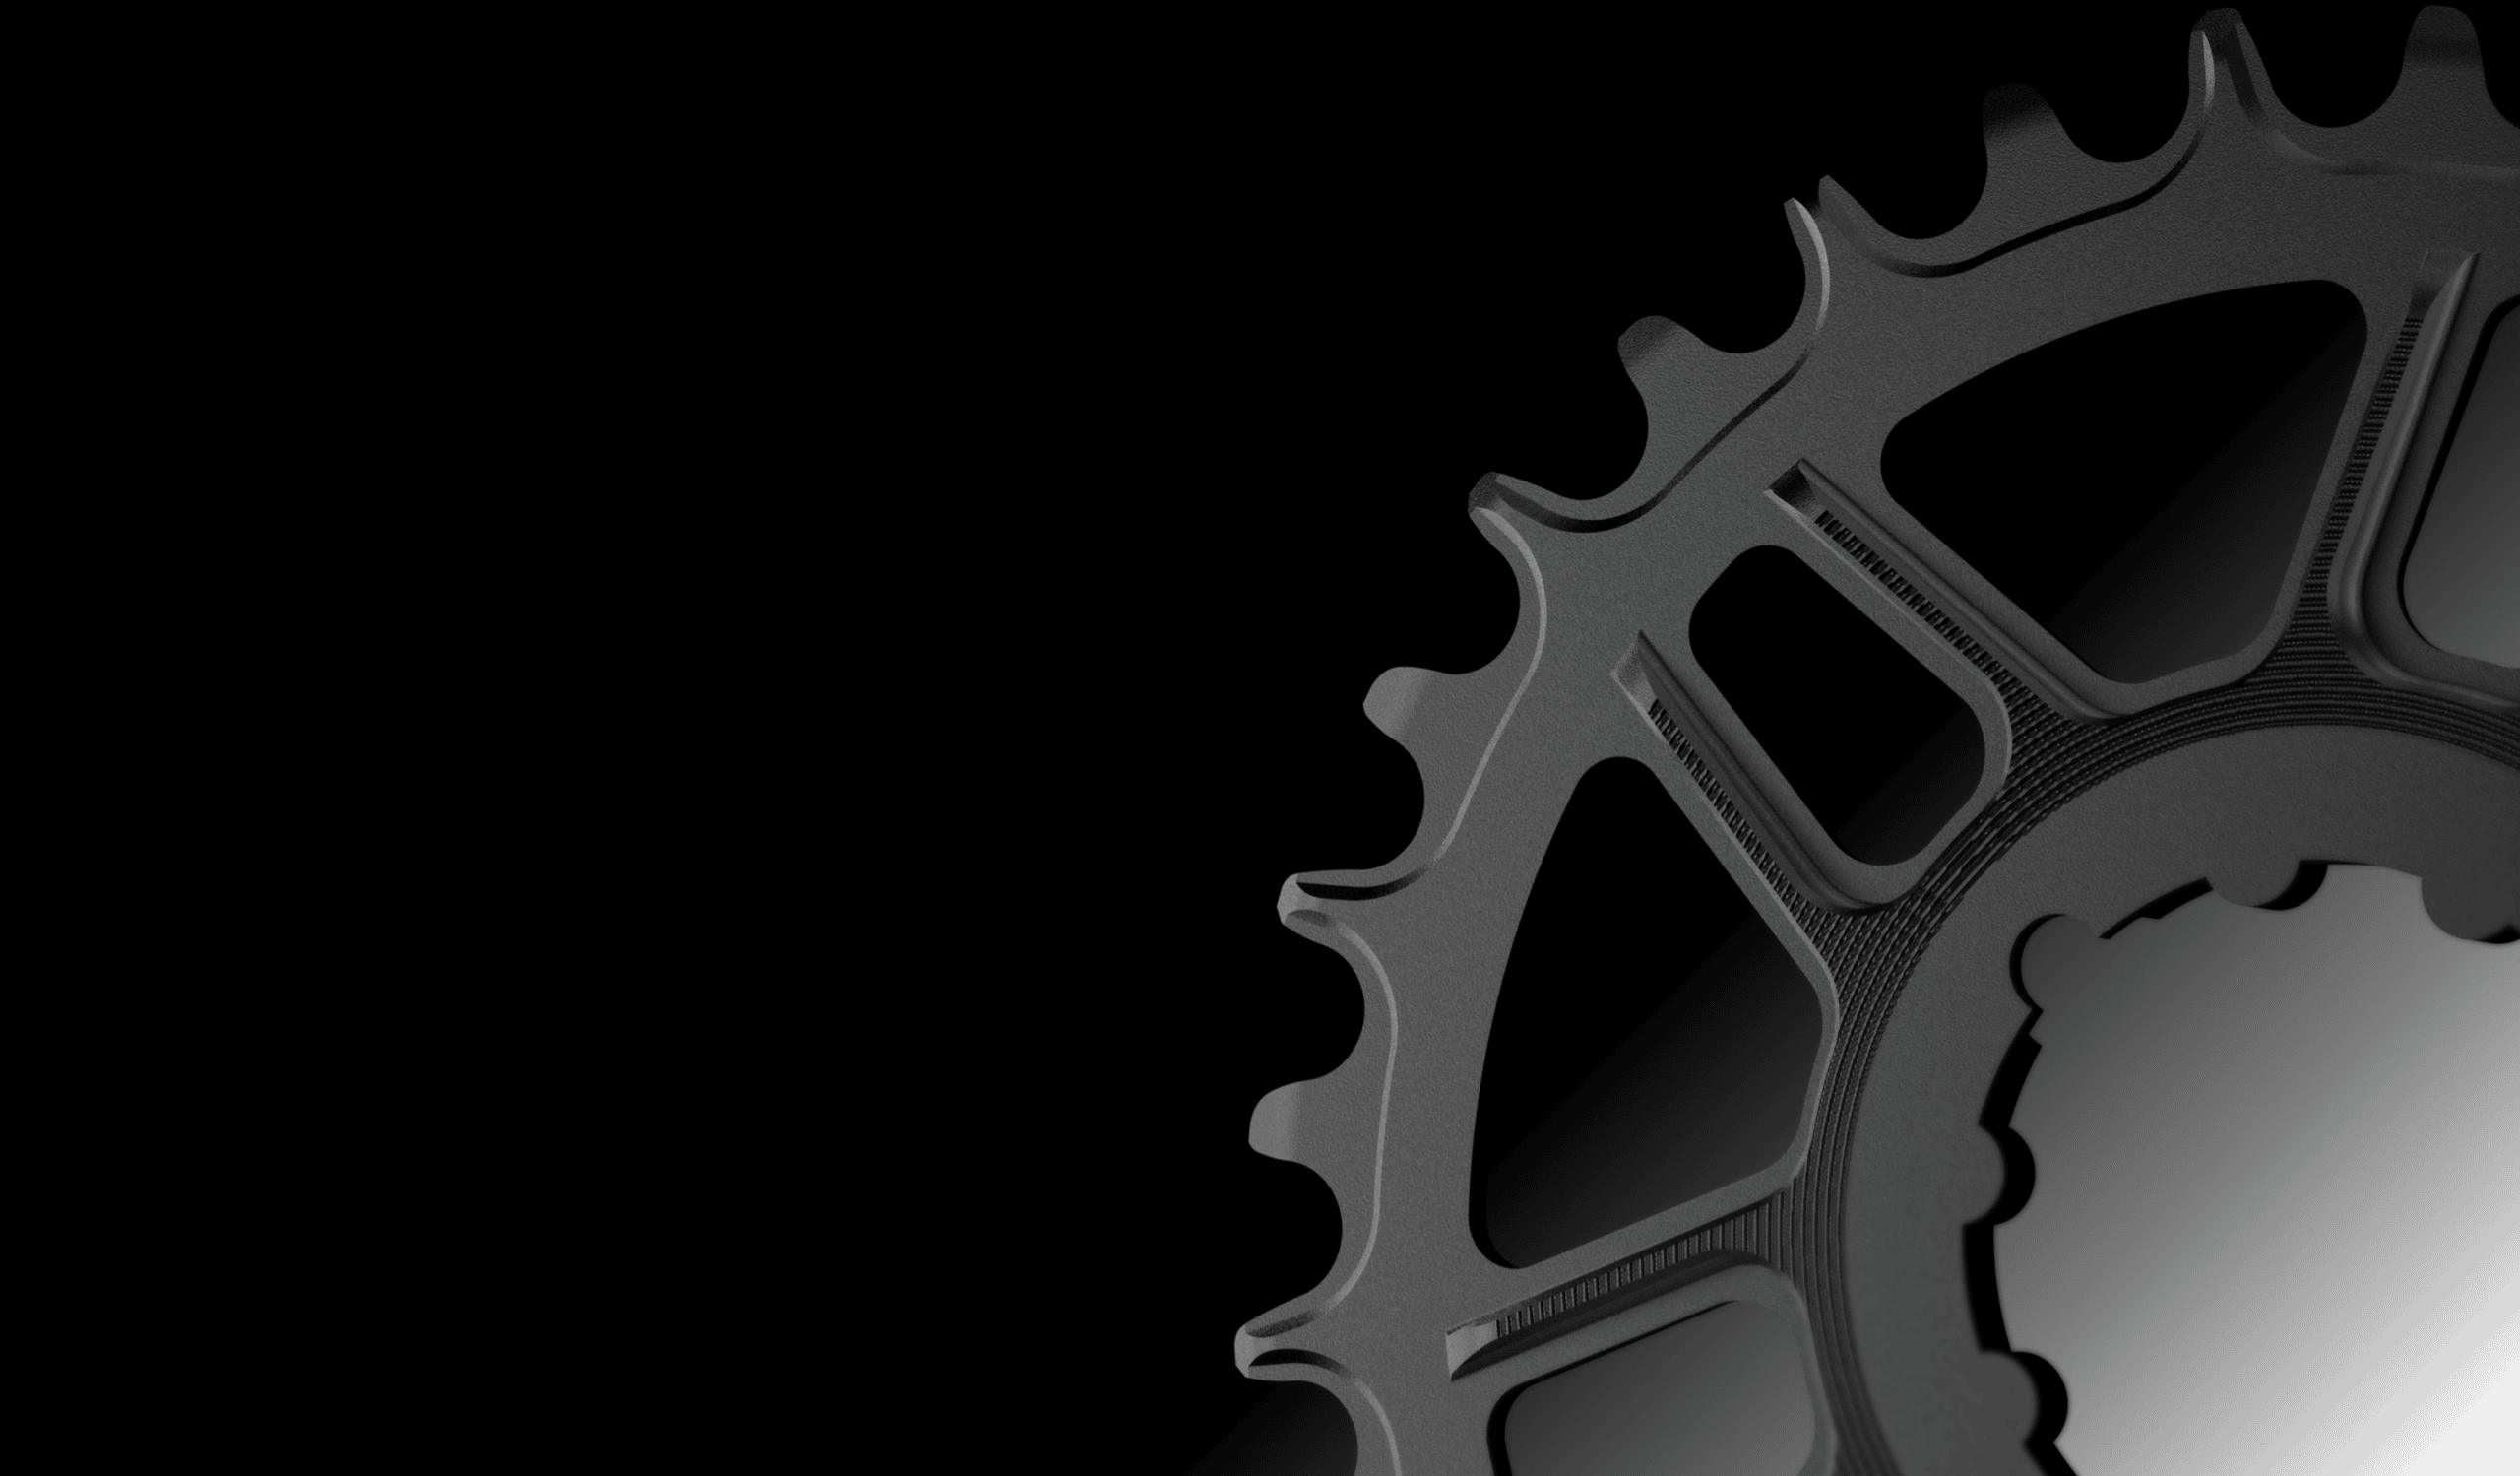 Praxis MTN Direct Mount 1x Chainring (wide/narrow)